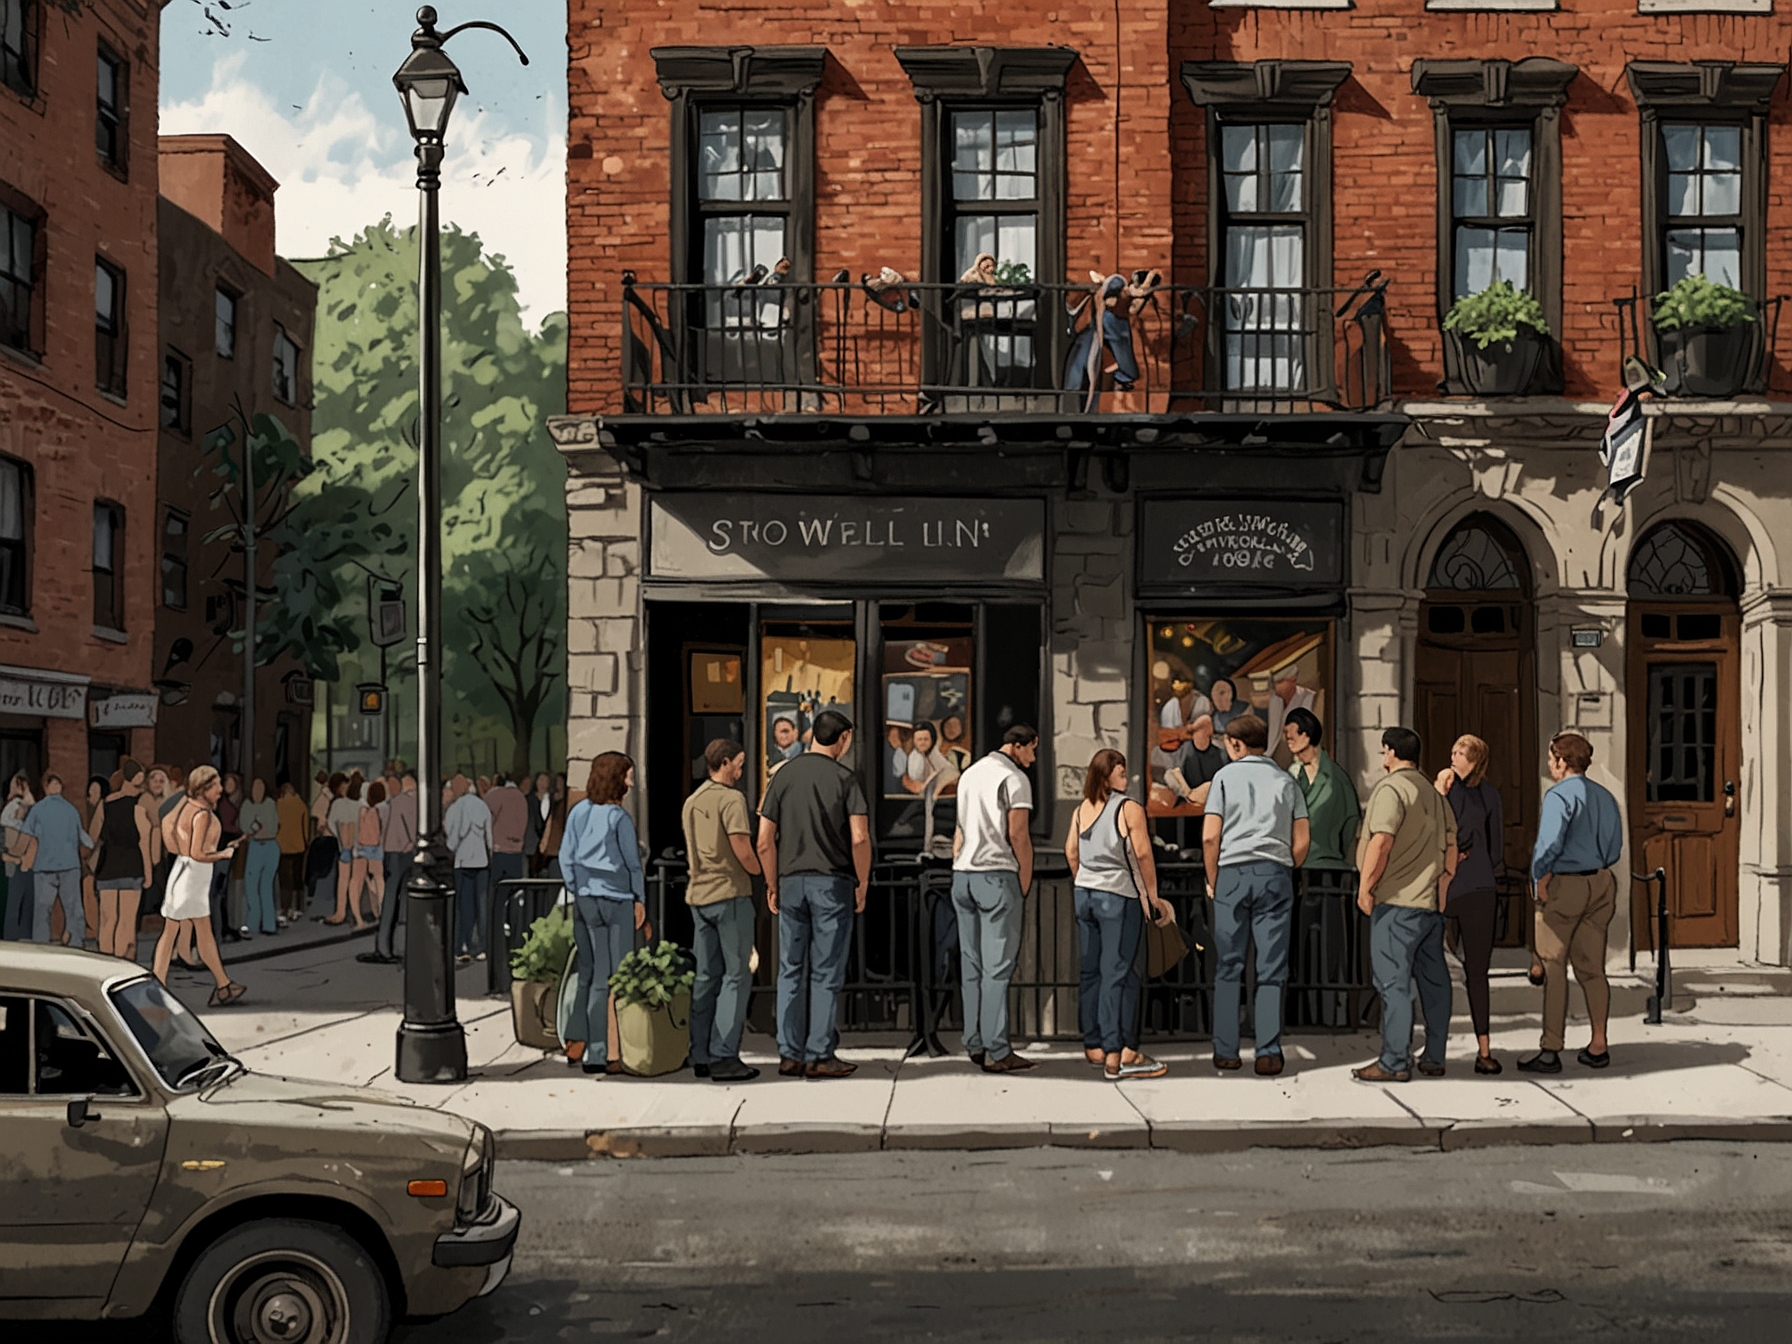 Visitors gather outside the historic Stonewall Inn in Greenwich Village, Manhattan, part of the Stonewall National Monument, a landmark honoring the 1969 LGBTQ+ rights movement.